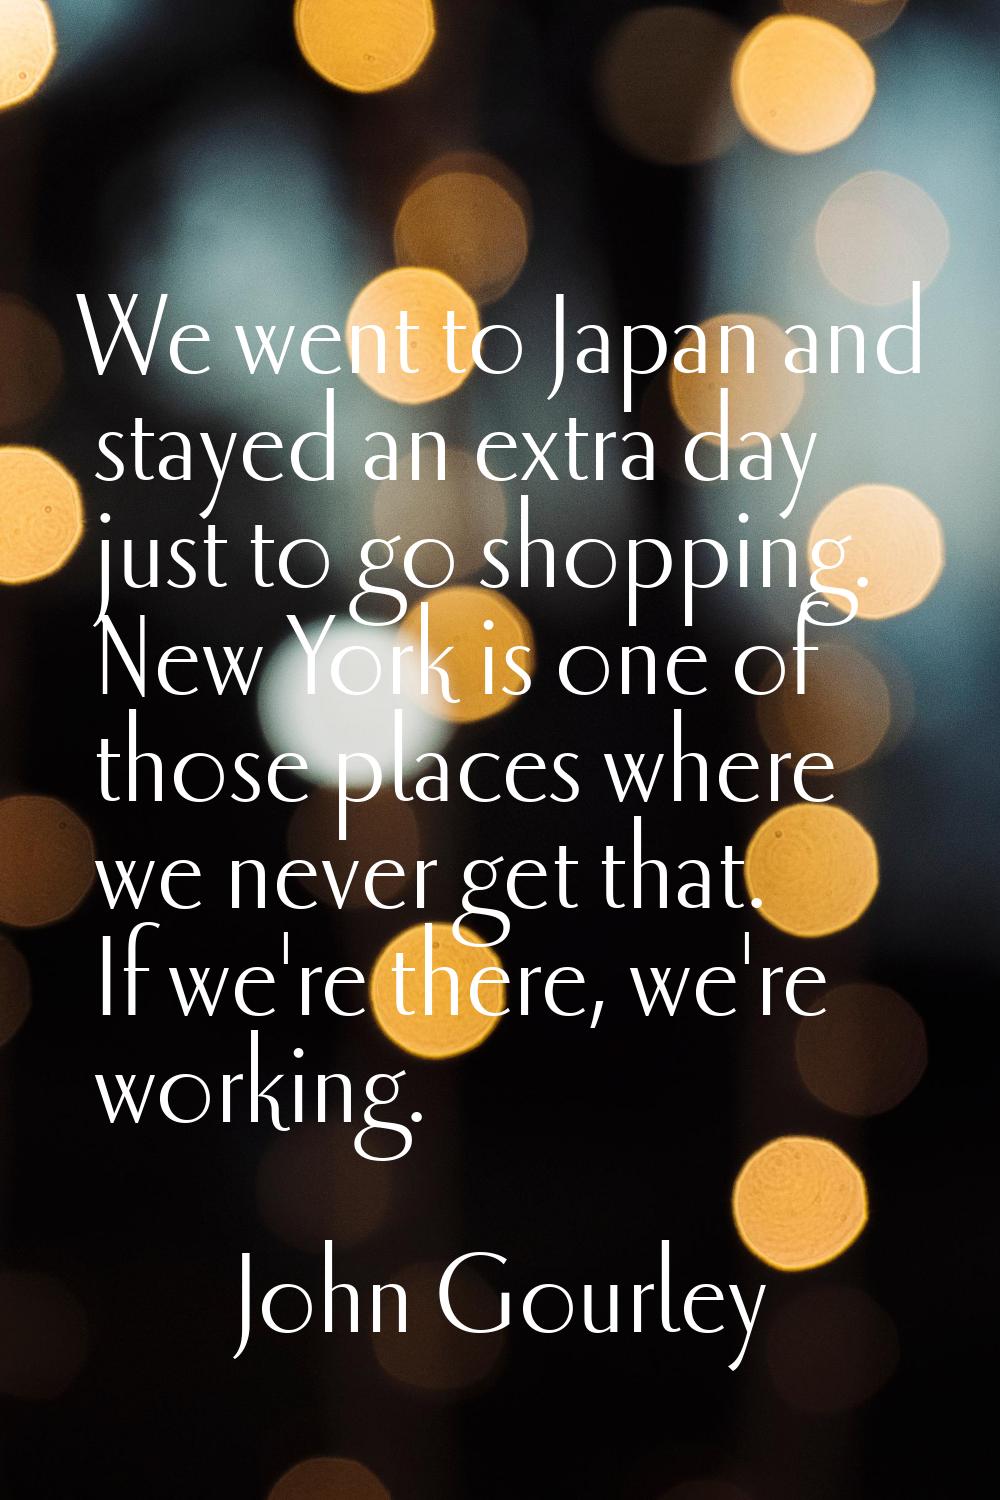 We went to Japan and stayed an extra day just to go shopping. New York is one of those places where